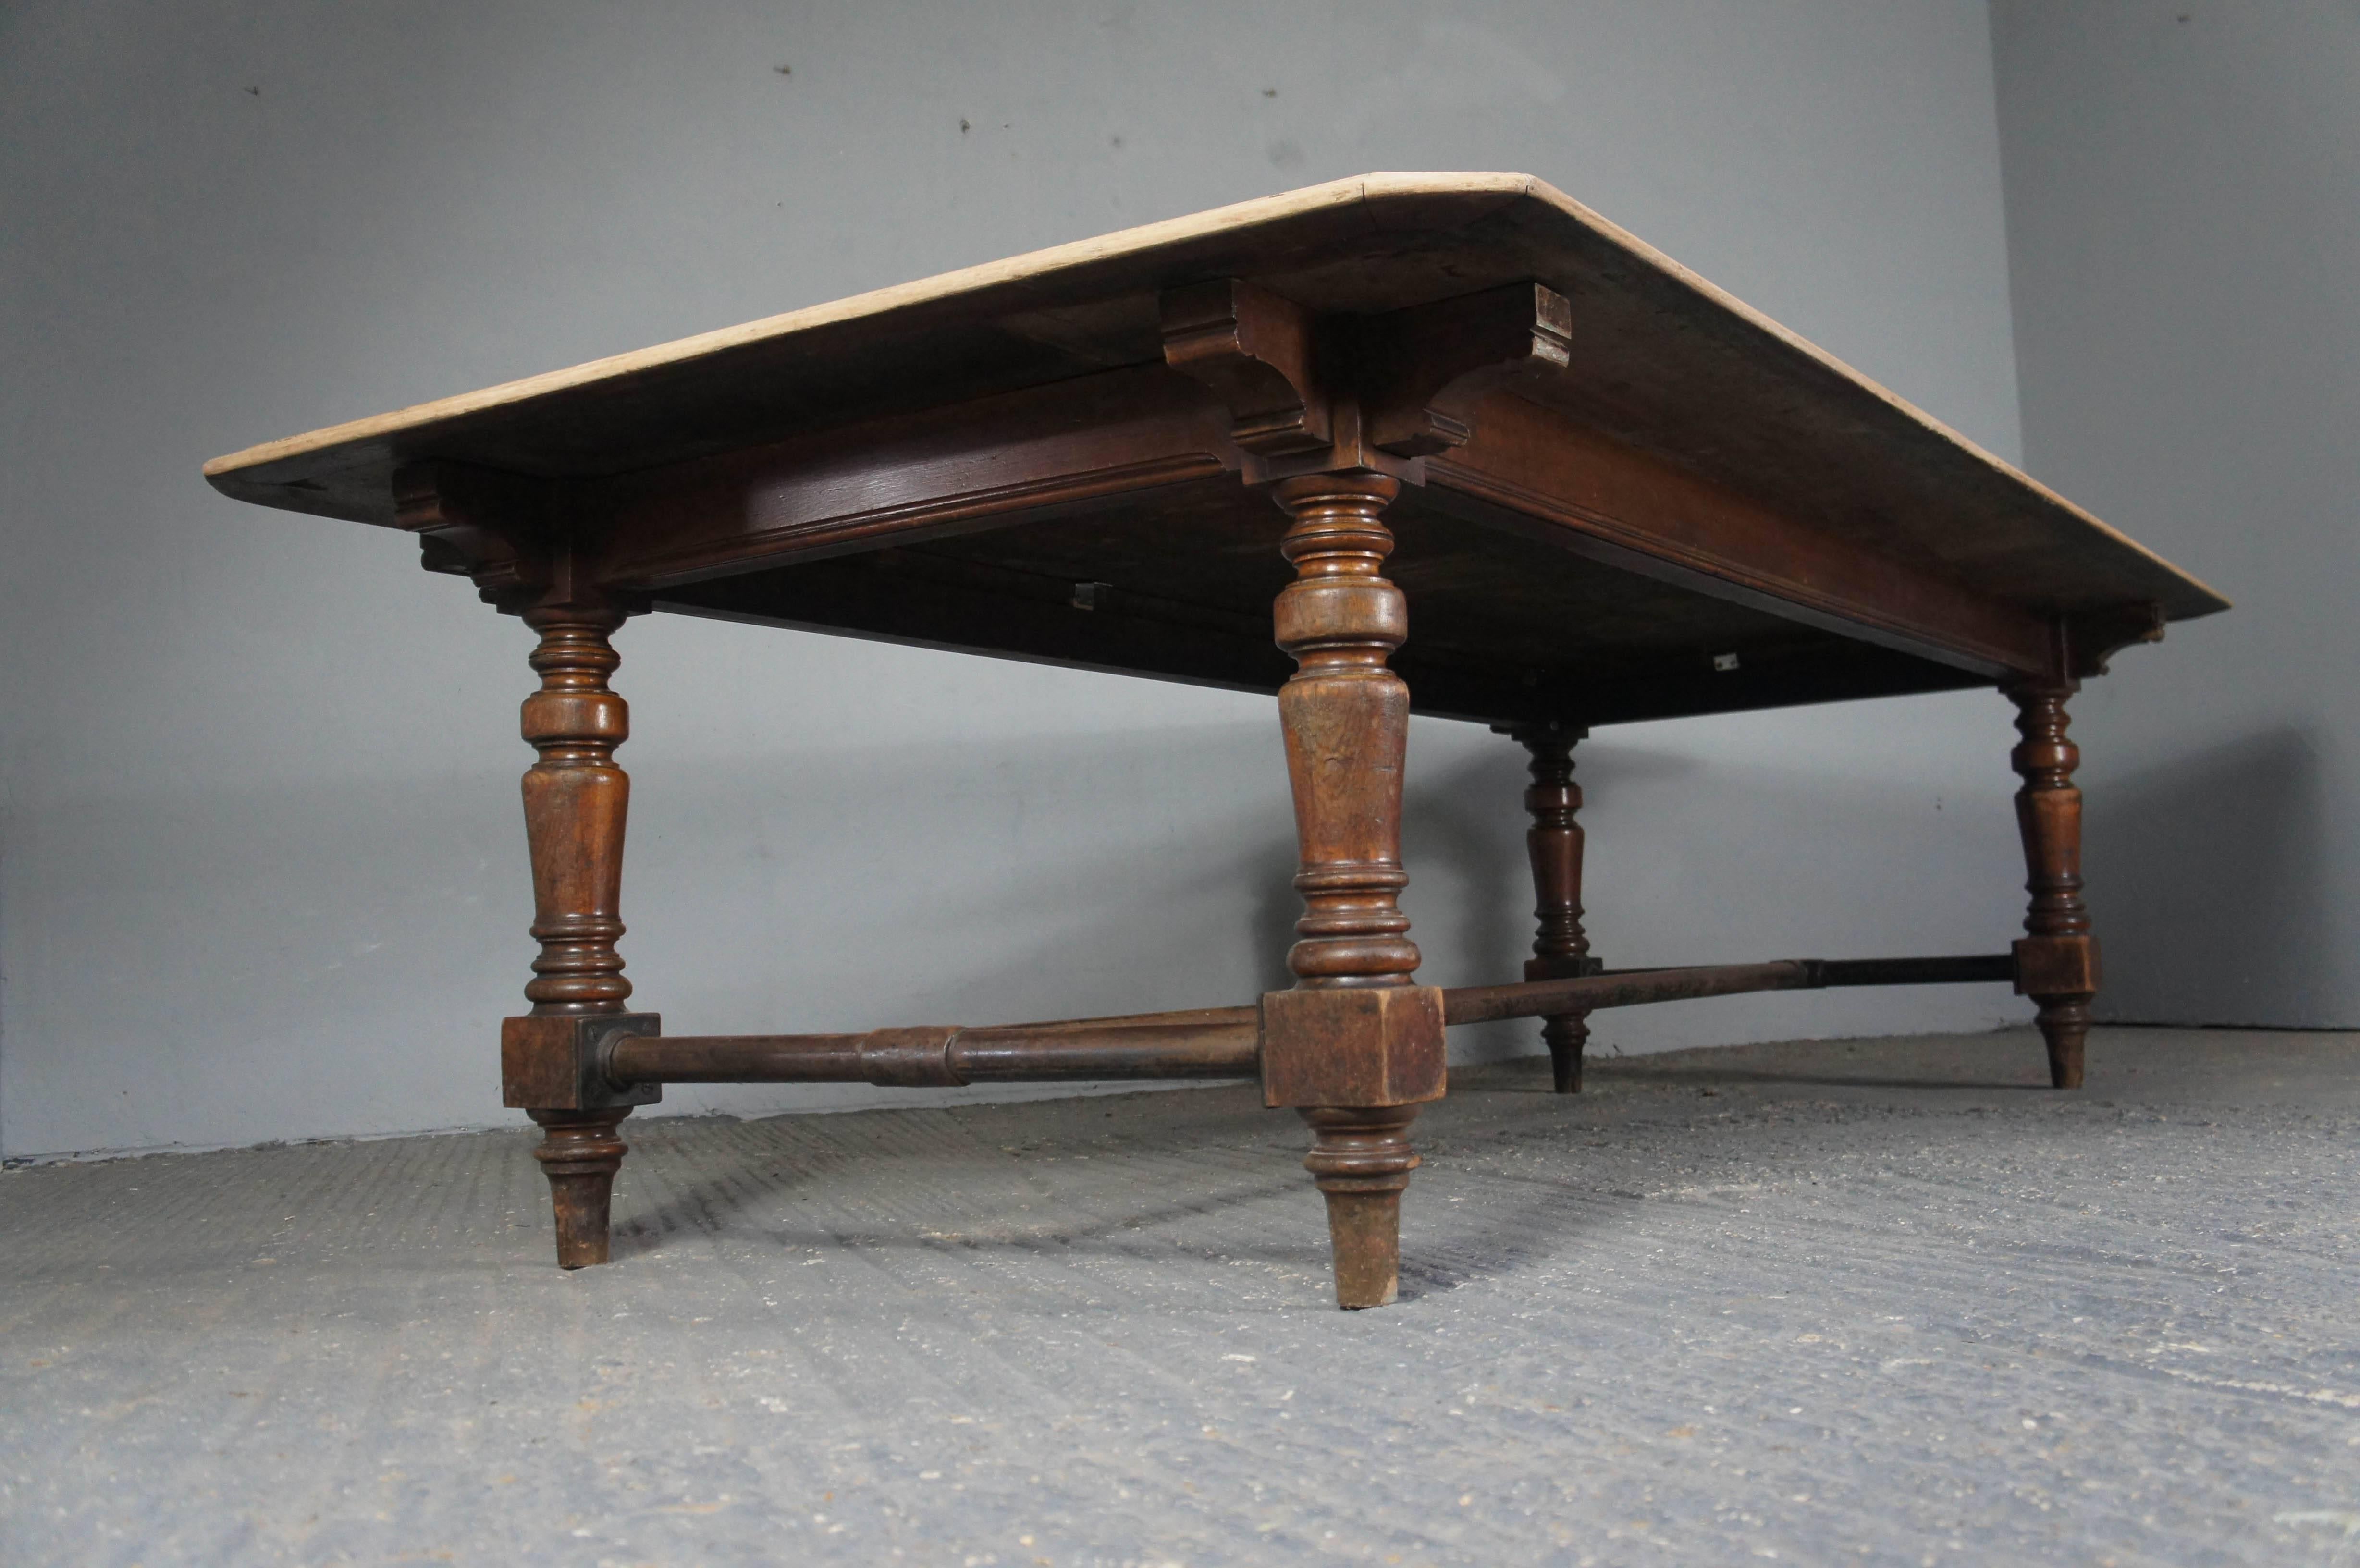 Huge mahogany dining table with bleached top. It features four turned legs and a later, rather unusual but quirky addition of a metal runner, as shown in the pictures. Comfortably seats 10-12 people. It matches perfectly with the pair of oak jointed